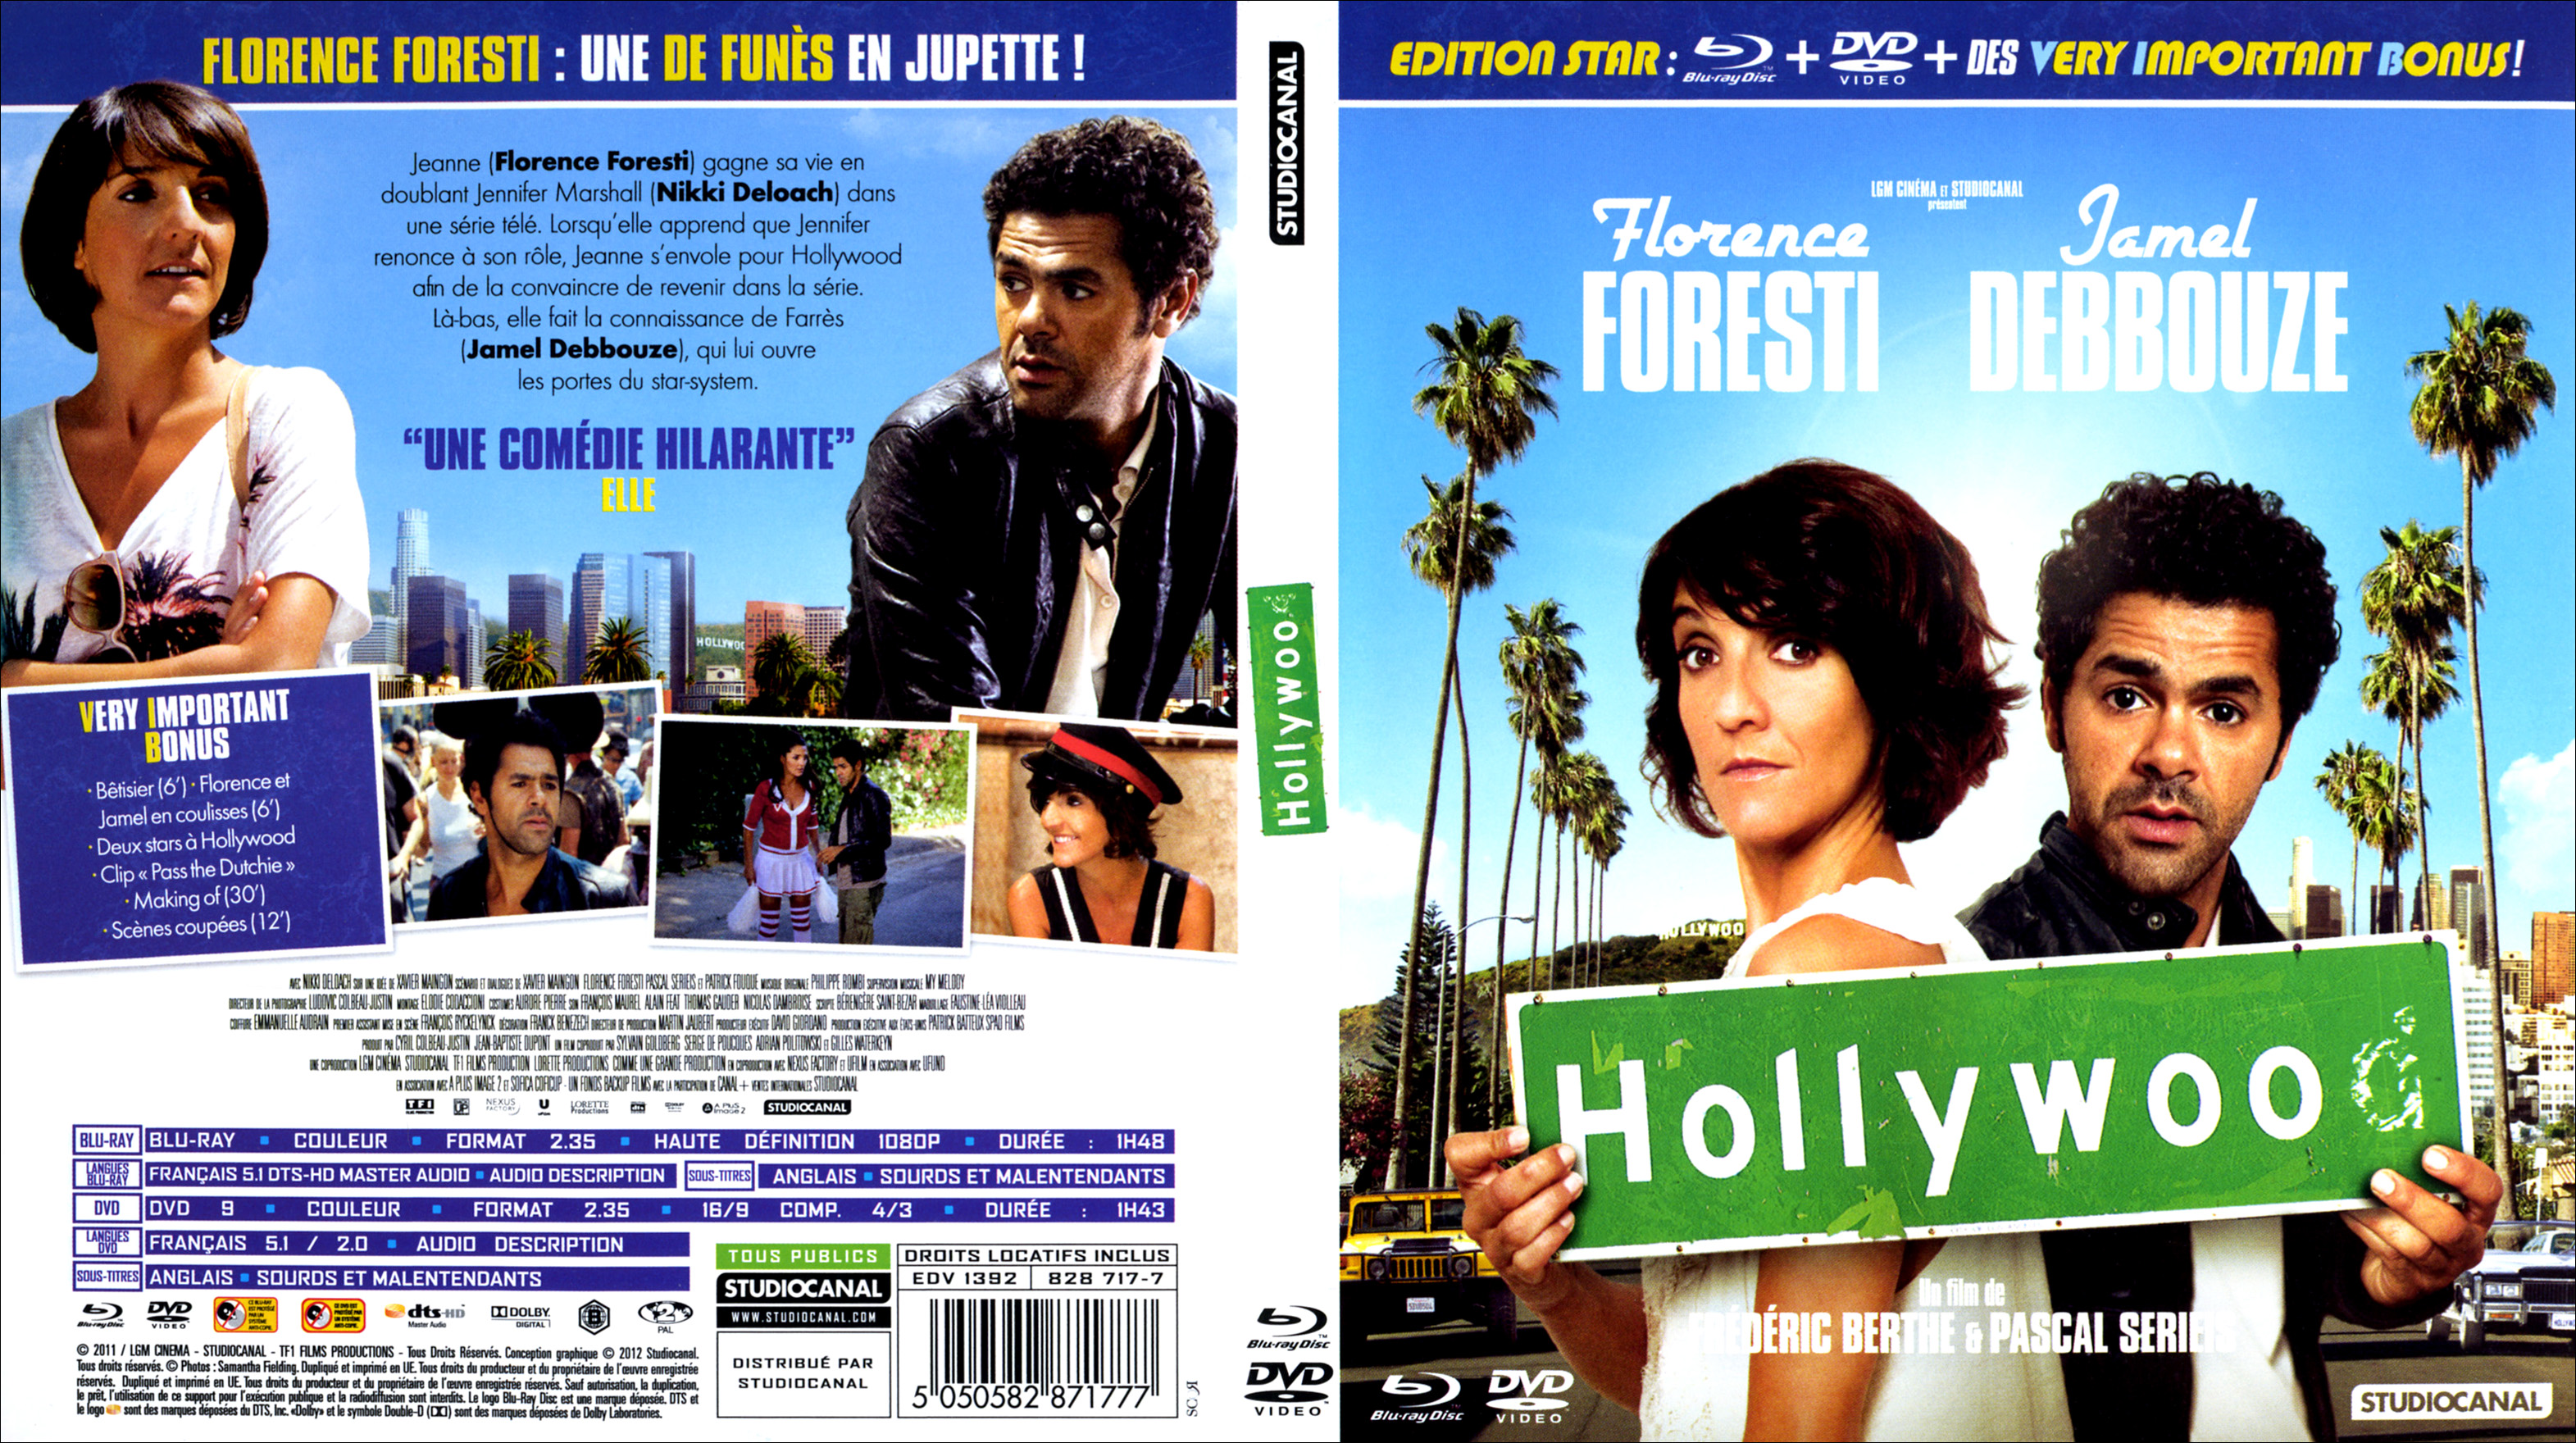 Jaquette DVD Hollywoo (BLU-RAY)